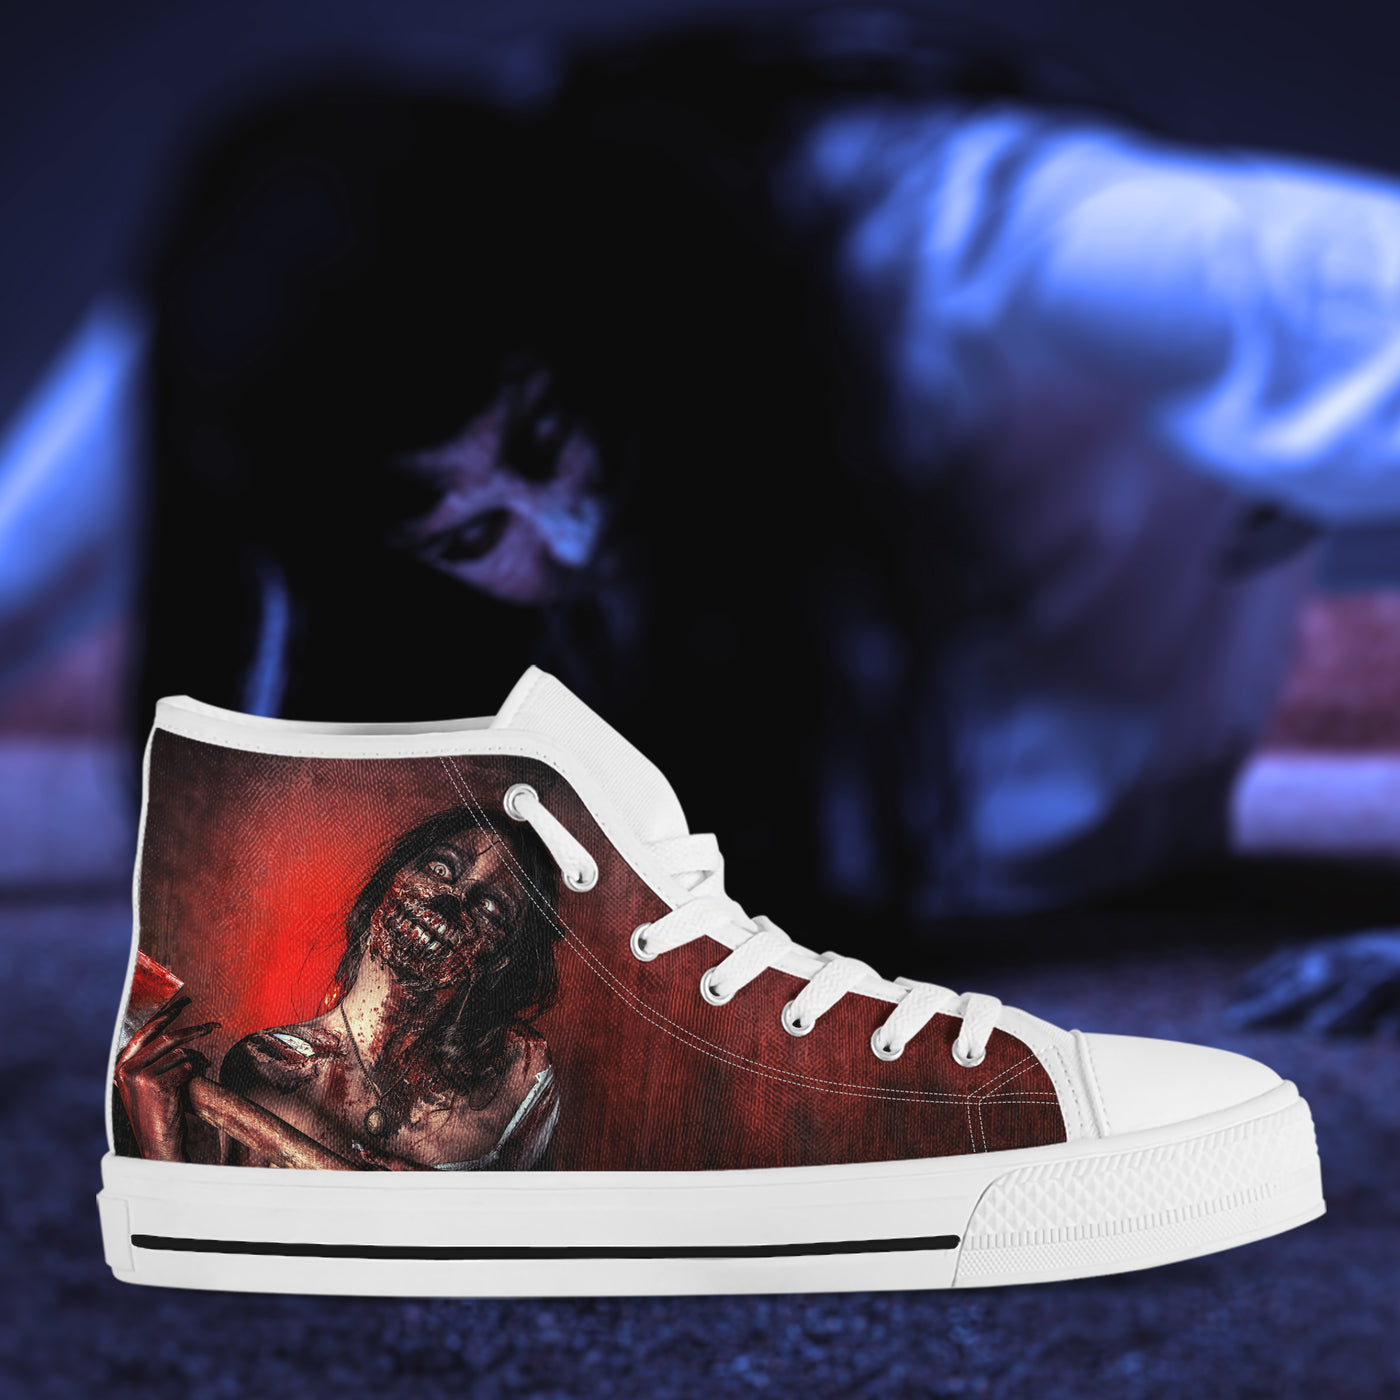 Black Horrorcore Menacing Zombie With An Ax | Women's Classic High Top Canvas Shoes